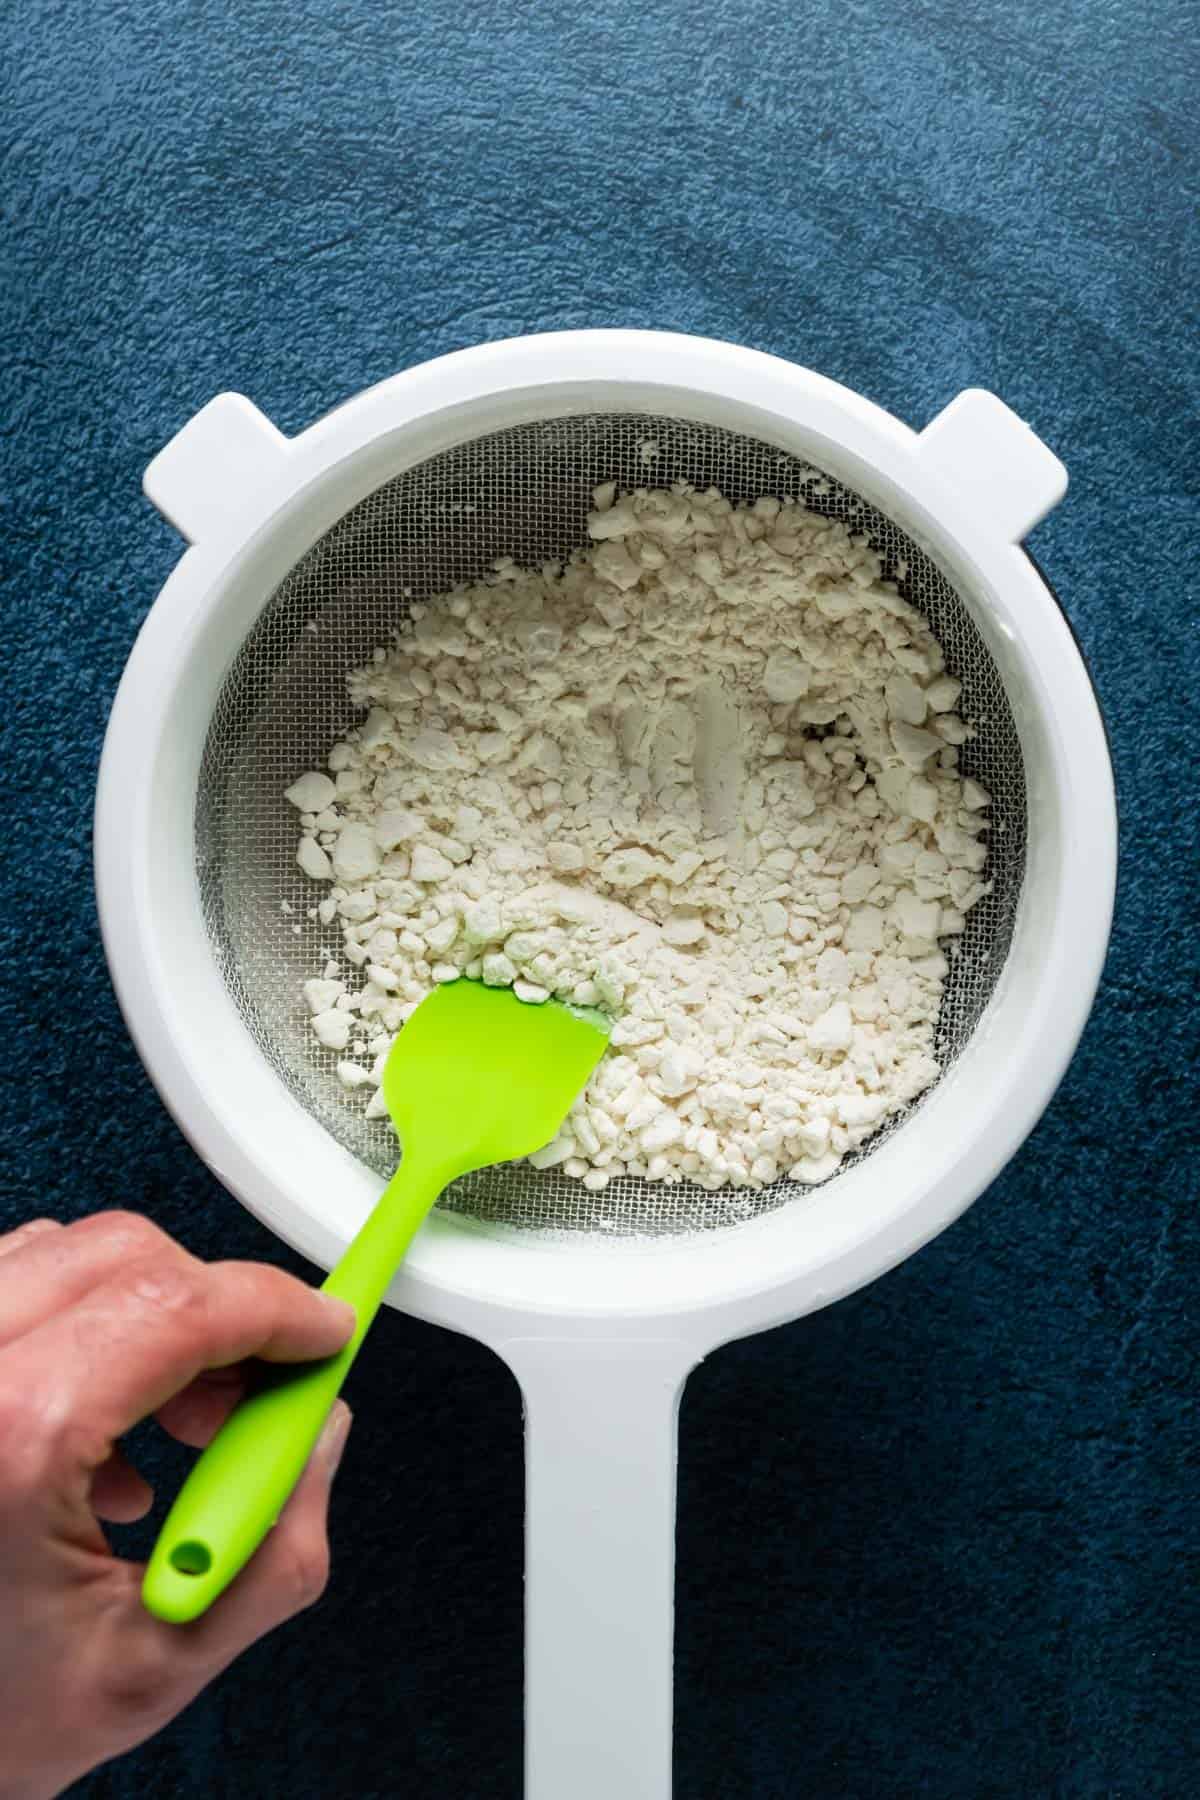 Sifting flour in a sieve over a bowl.